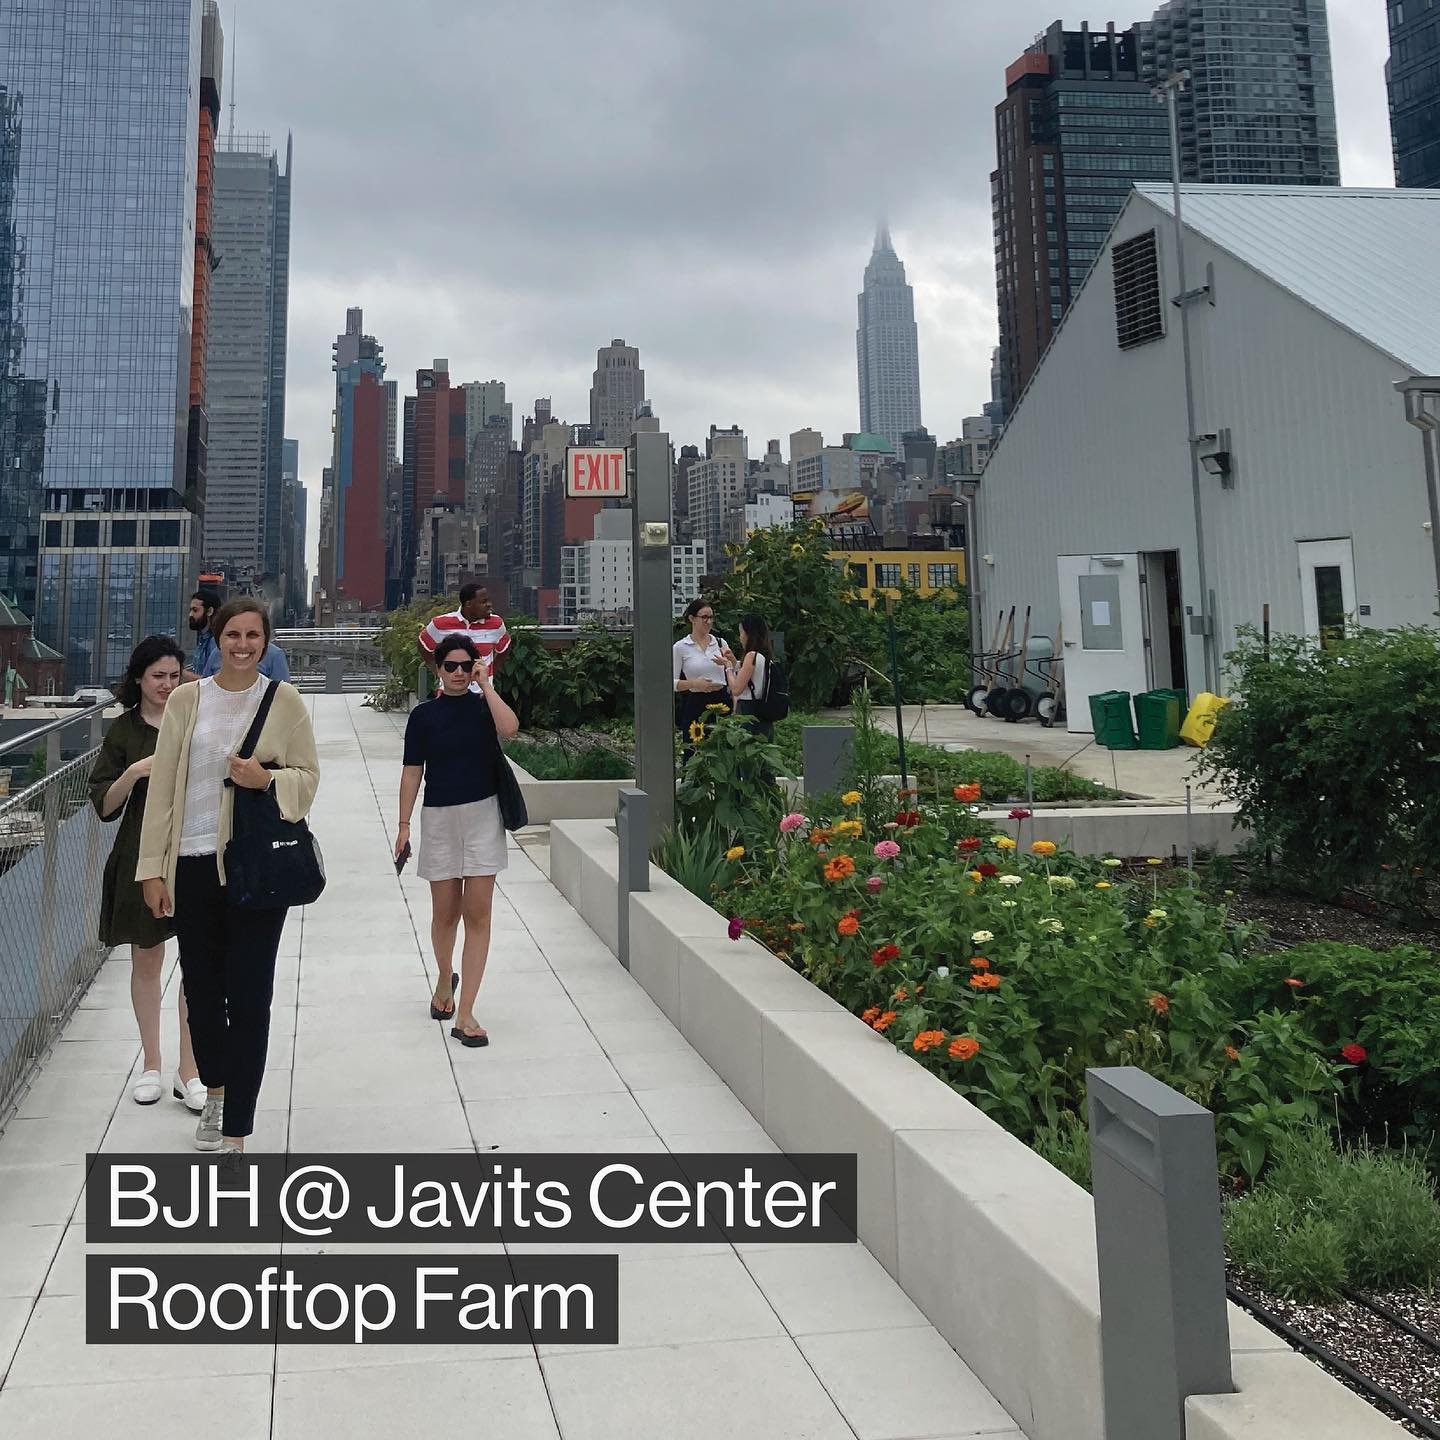 Last summer, BJH staff toured the Javits Center, NYC&rsquo;s 850,000 SF convention center that supports the local economy by attracting millions of visitors to New York City each year. A highlight of the tour was exploring the rooftop farm, operated 